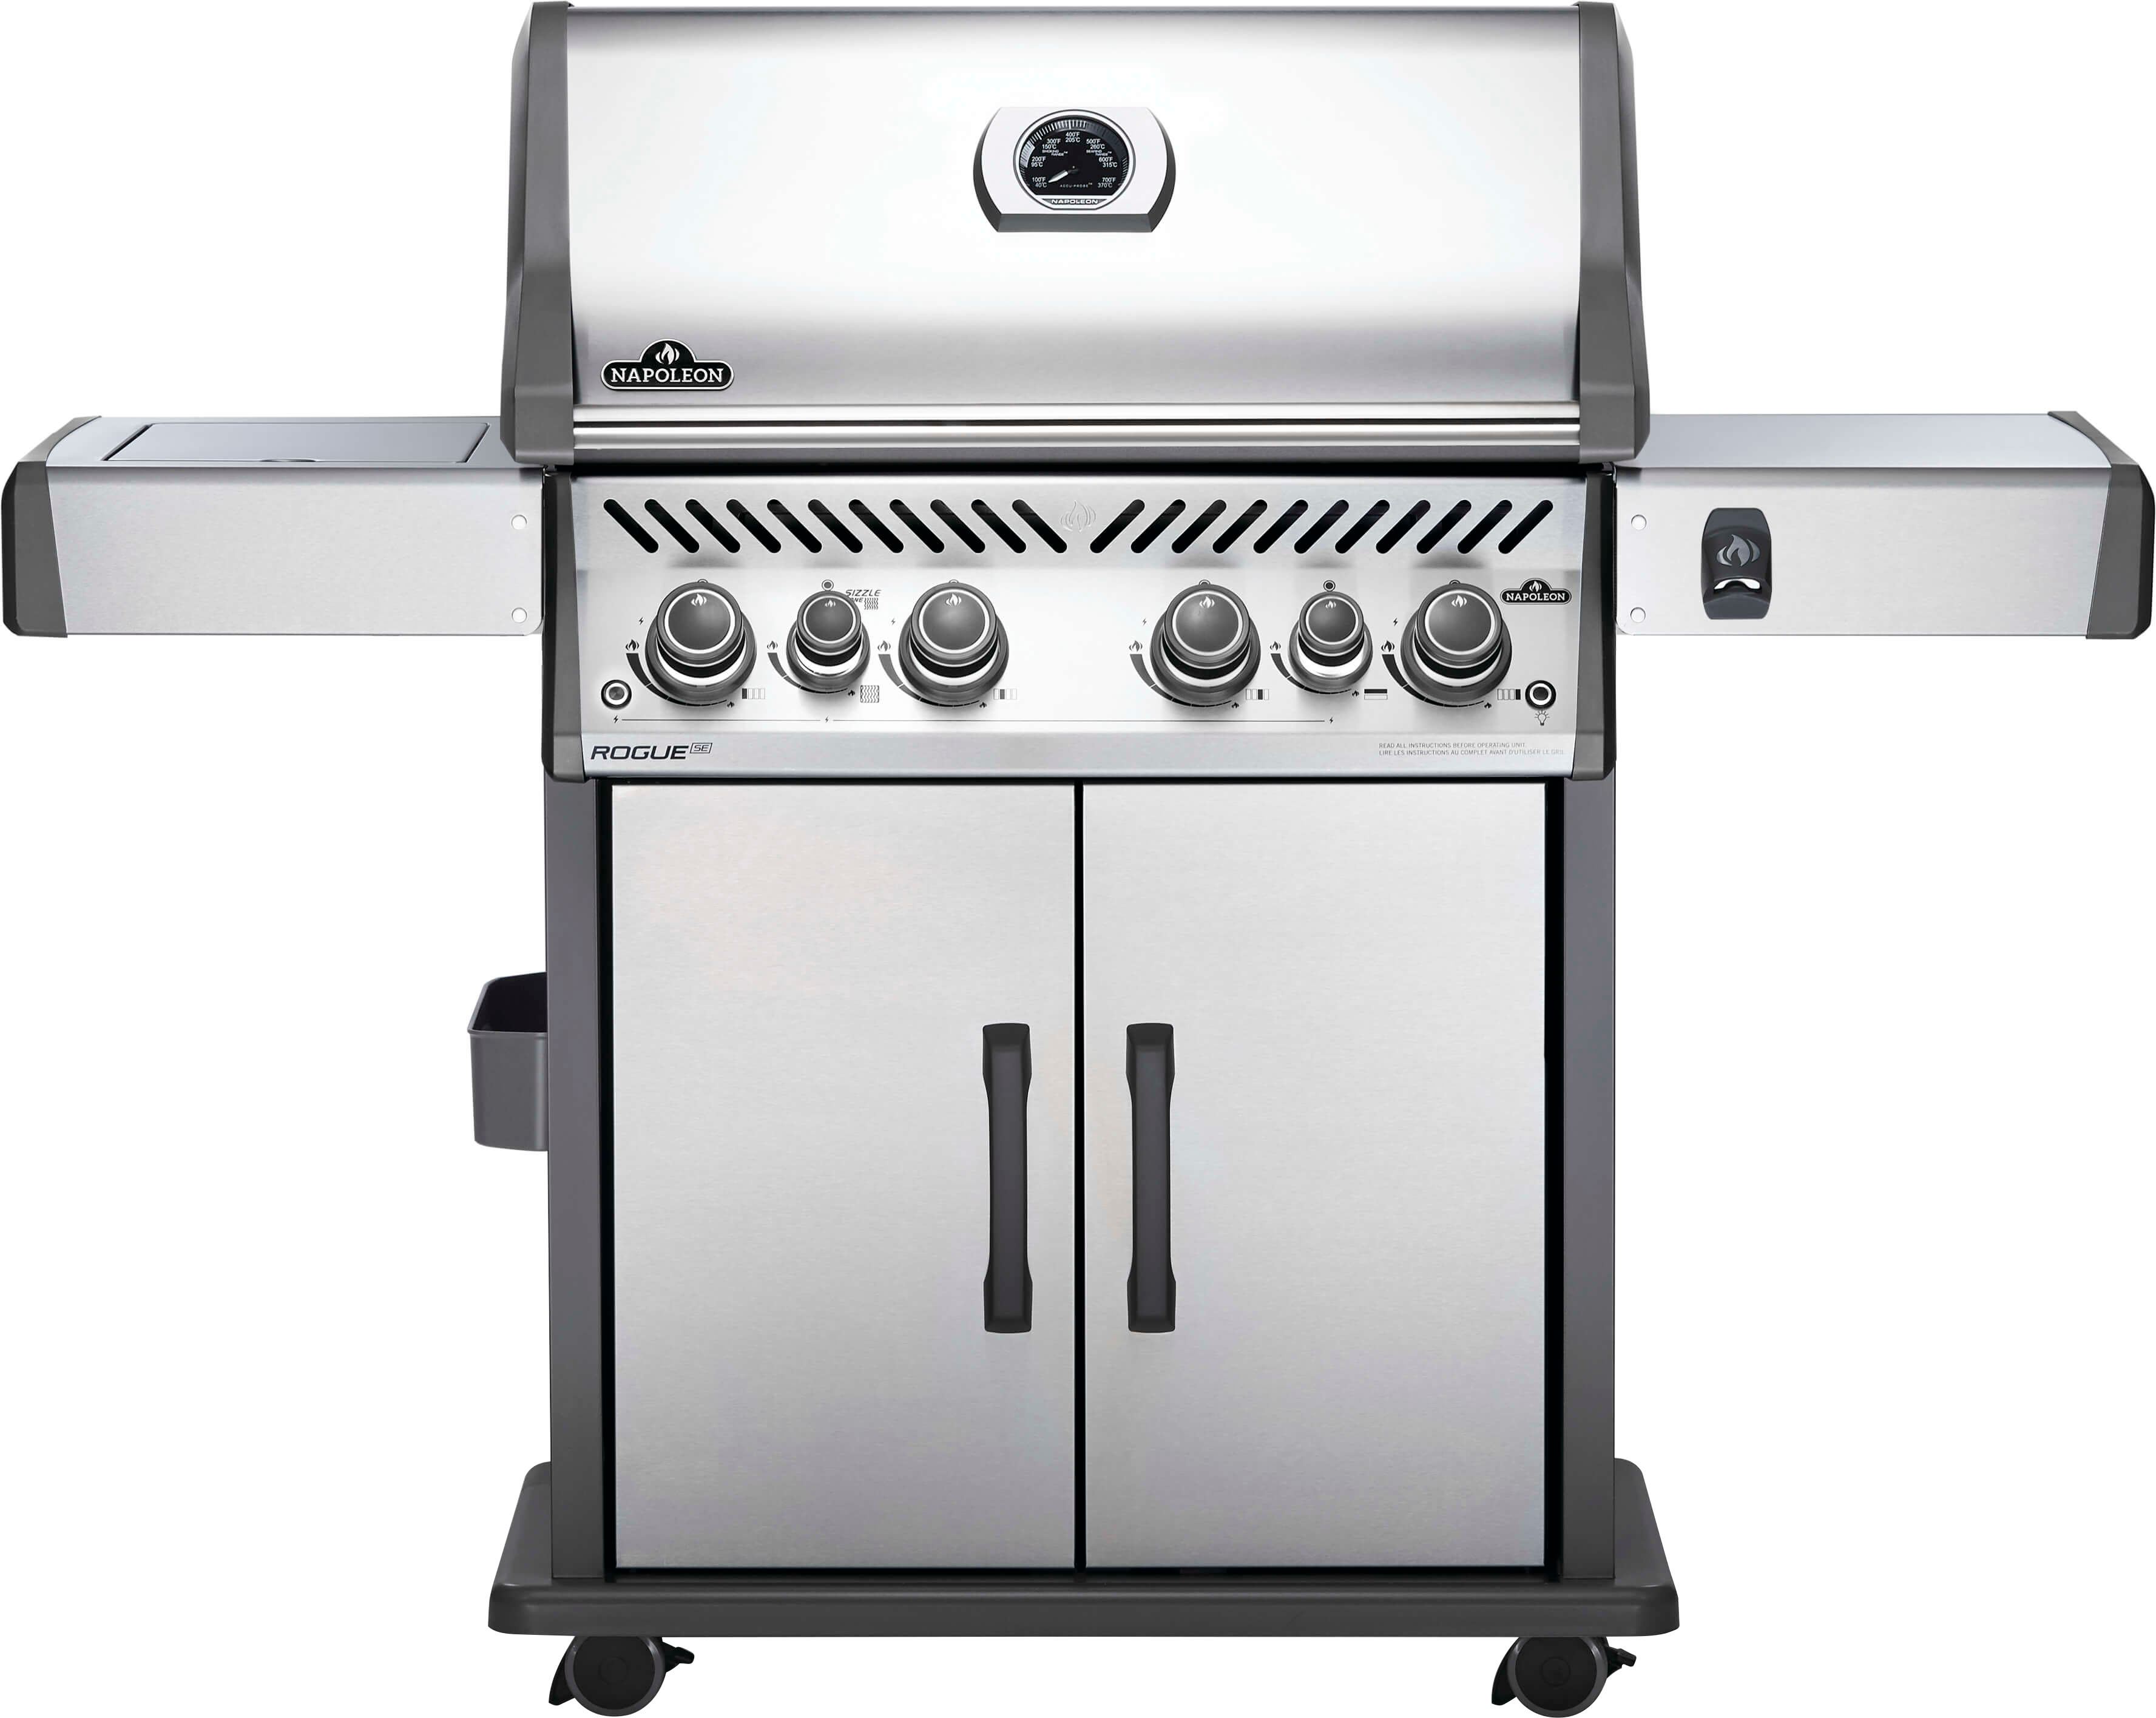 0629162134851 - NAPOLEON - ROGUE SE 525 PROPANE GAS GRILL WITH INFRARED REAR AND SIDE BURNERS, STAINLESS STEEL - STAINLESS STEEL